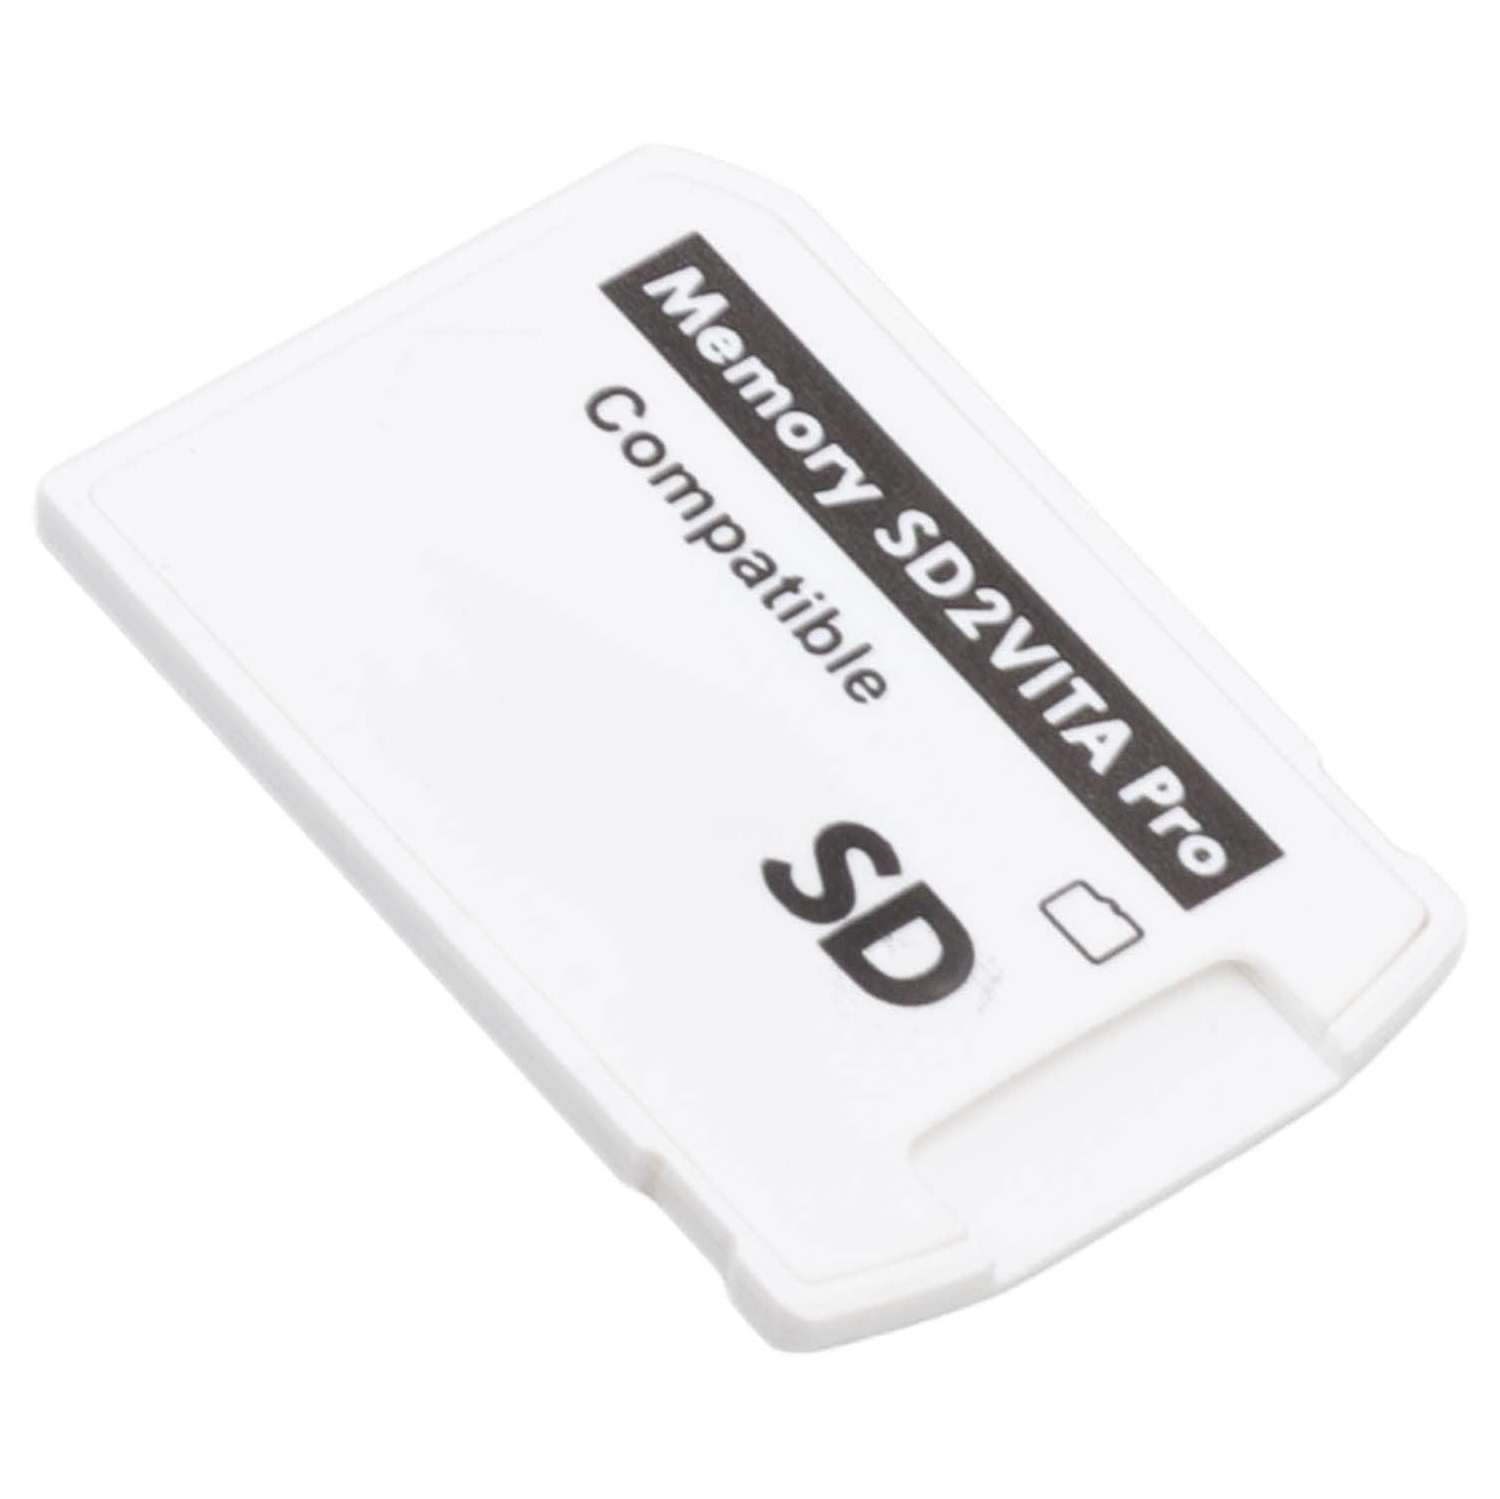 SD Card Reader, Micro SD Storage Card Adapter for PS Vita 1000 2000, for HENkaku Enso System